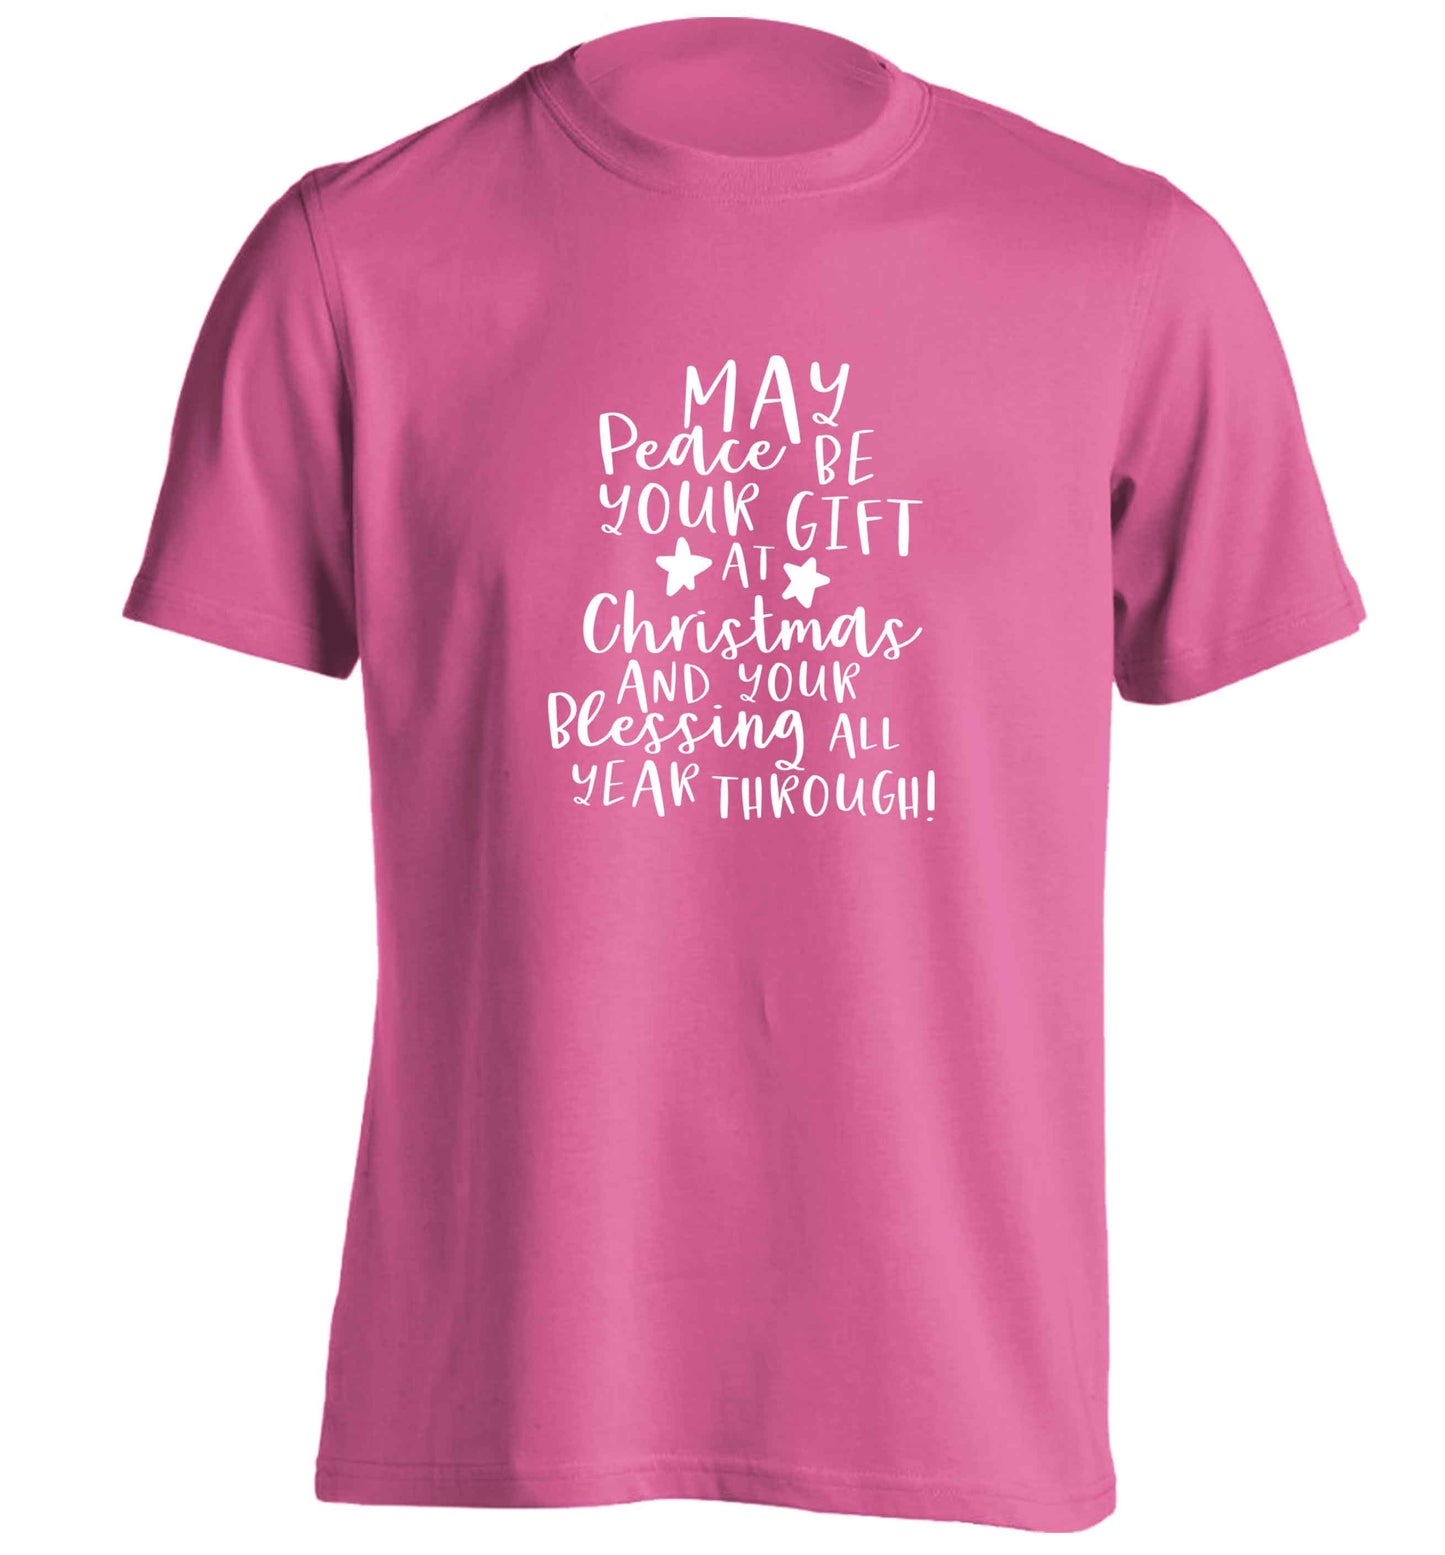 Peace be your Gift at Christmas Gift adults unisex pink Tshirt 2XL